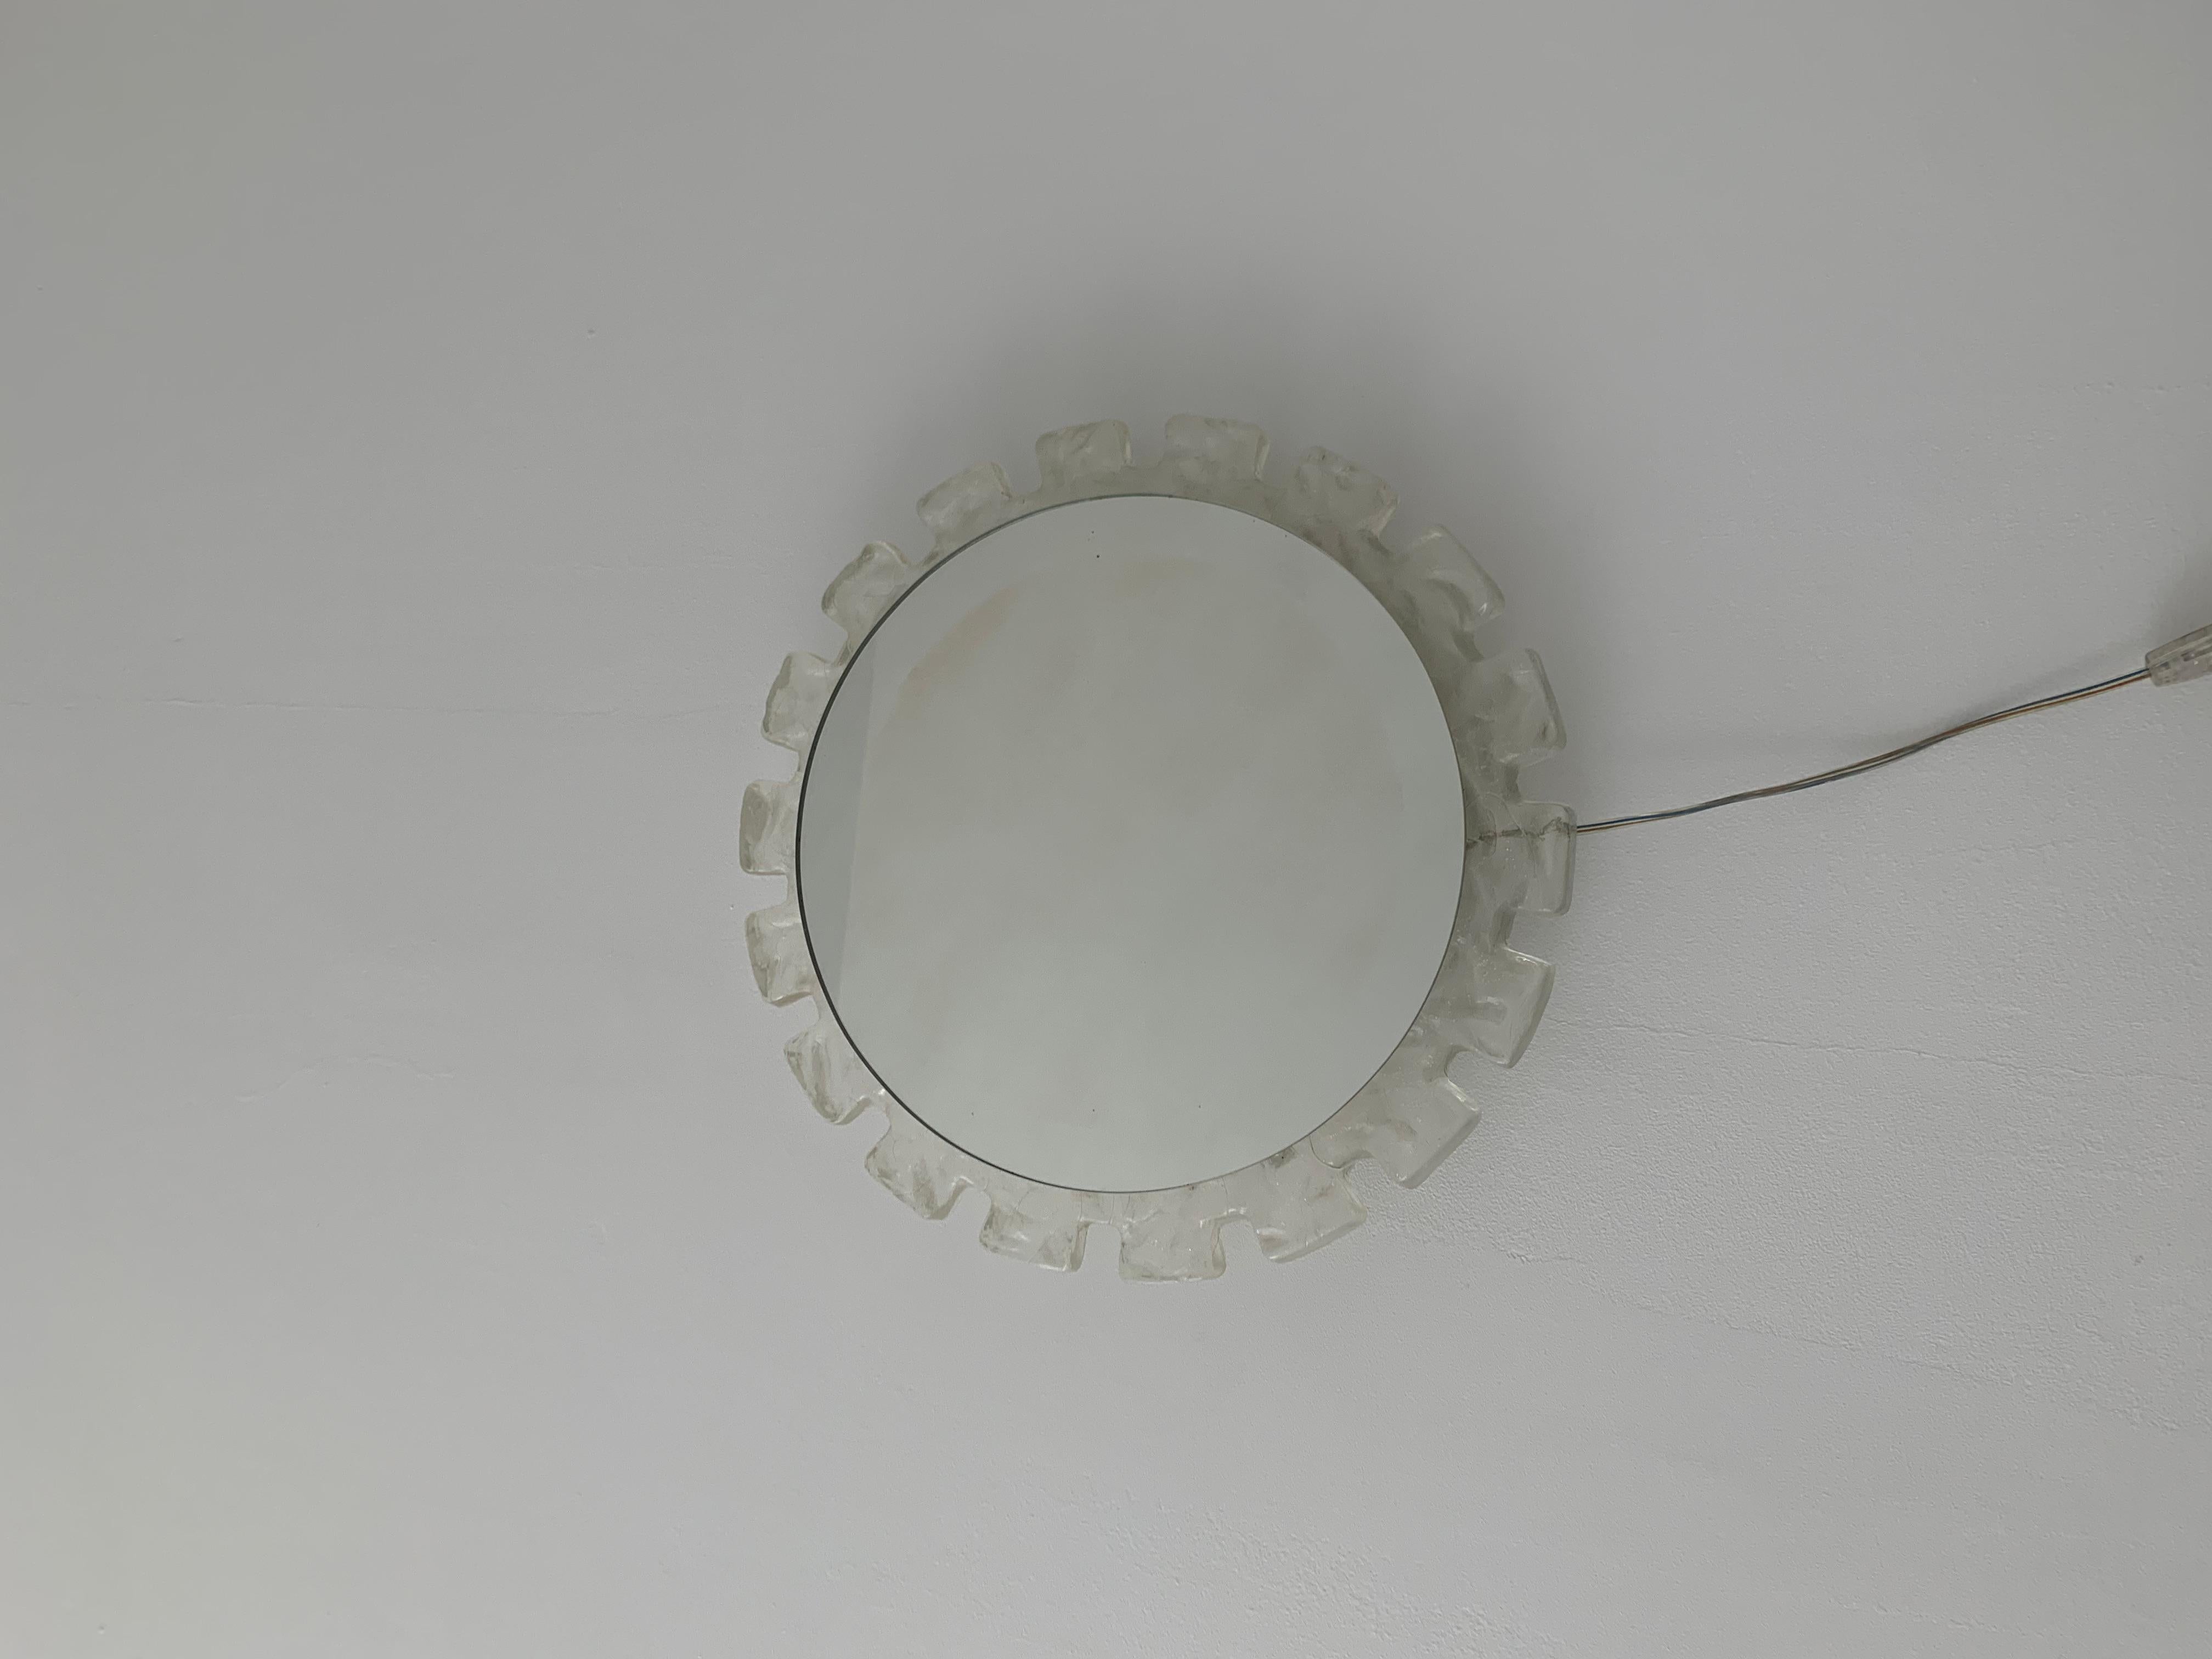 Hillebrand Vintage Lucite Wall Mirror with Backlight, 1970’s, Germany For Sale 2